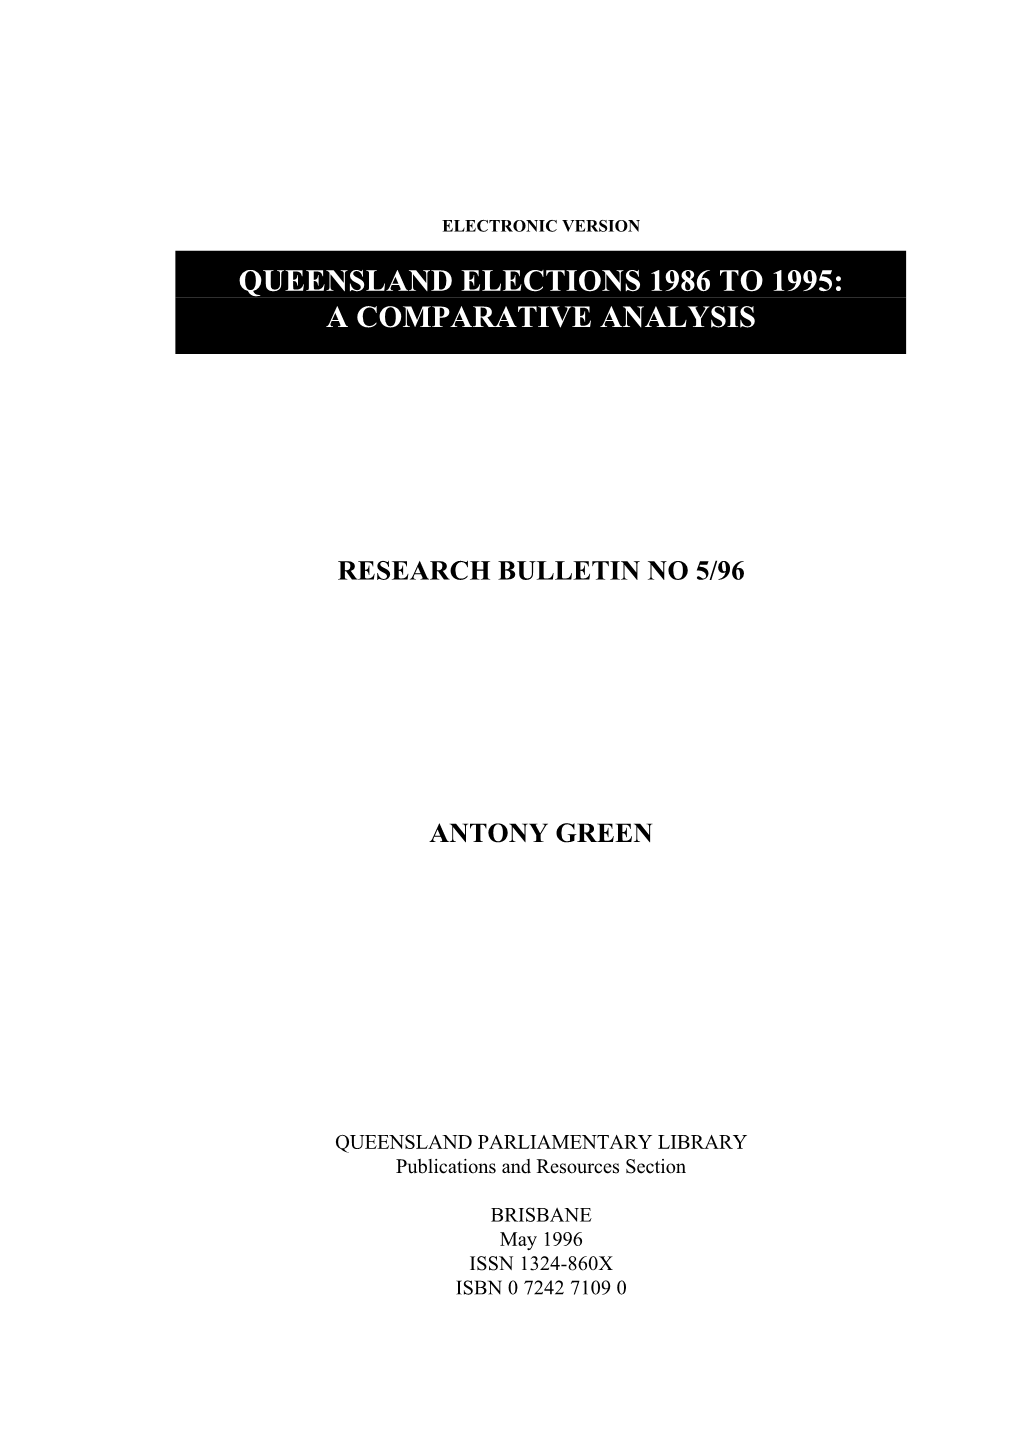 Queensland Elections 1986 to 1995: a Comparative Analysis